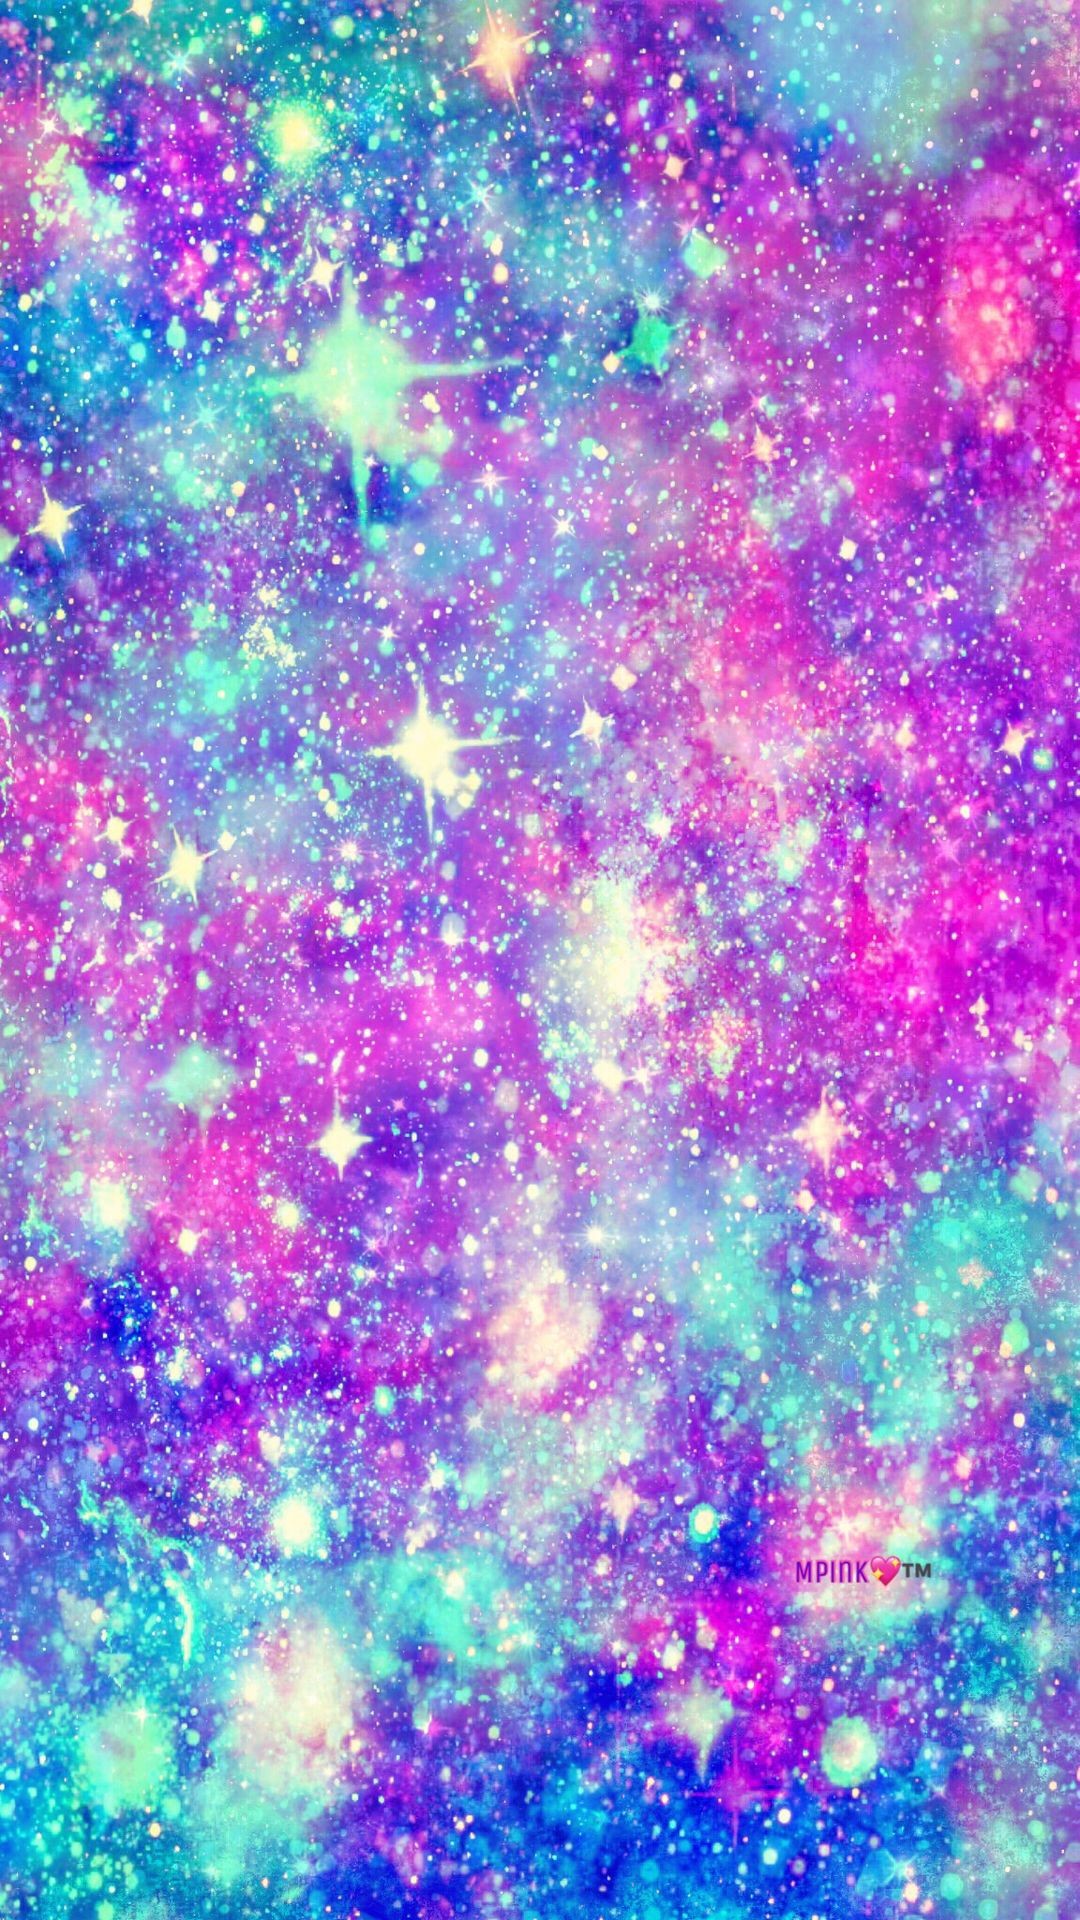 Res - 1080x1920, - Glitter Colorful Galaxy , HD Wallpaper & Backgrounds